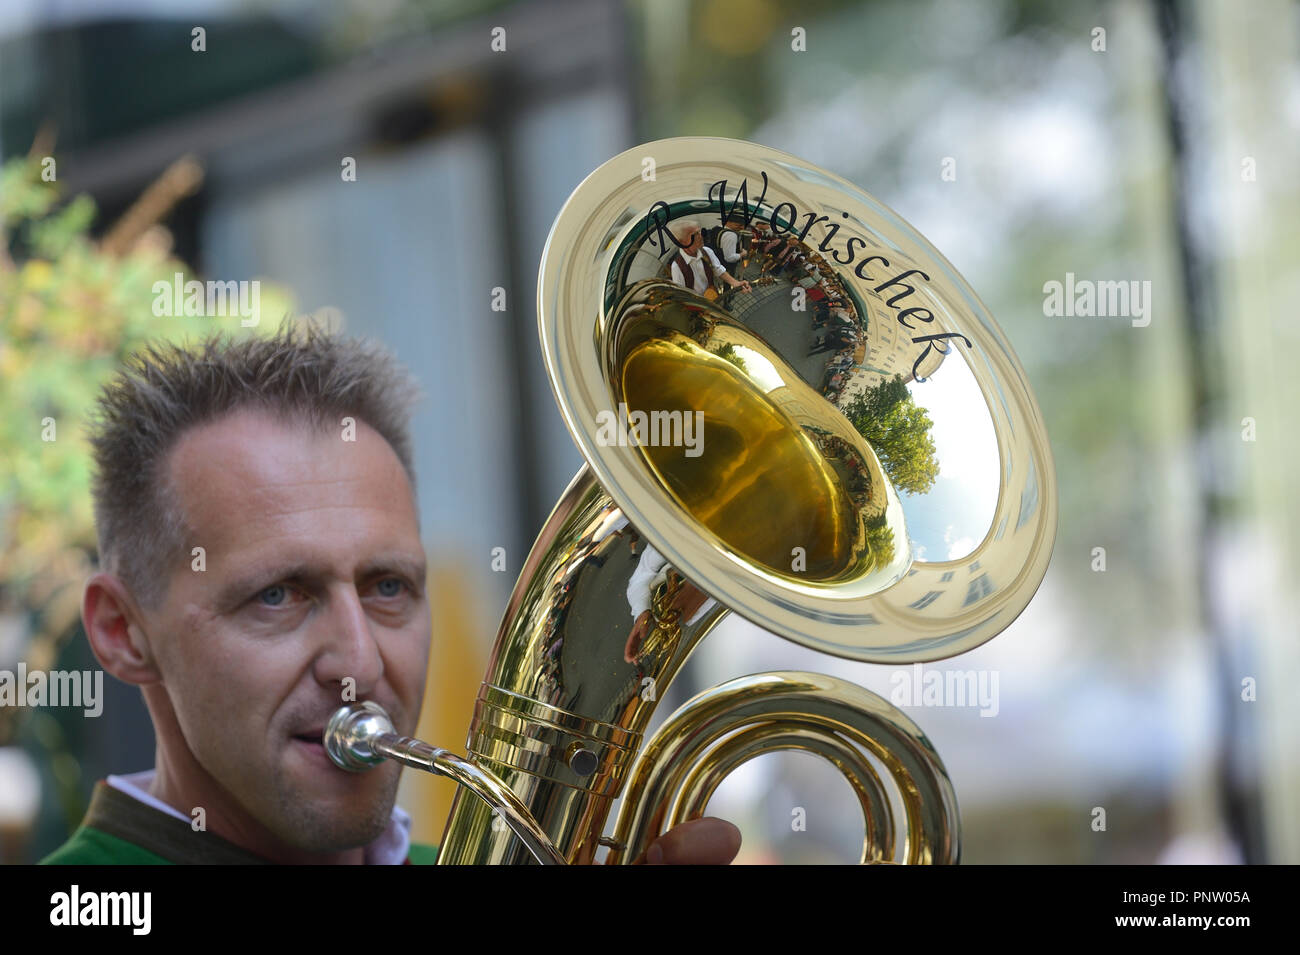 Graz, Styria, Austria. Great Folk Culture Festival in the state capital of Styria, Graz. Image shows musician with brass instrument in Graz, Styria Stock Photo